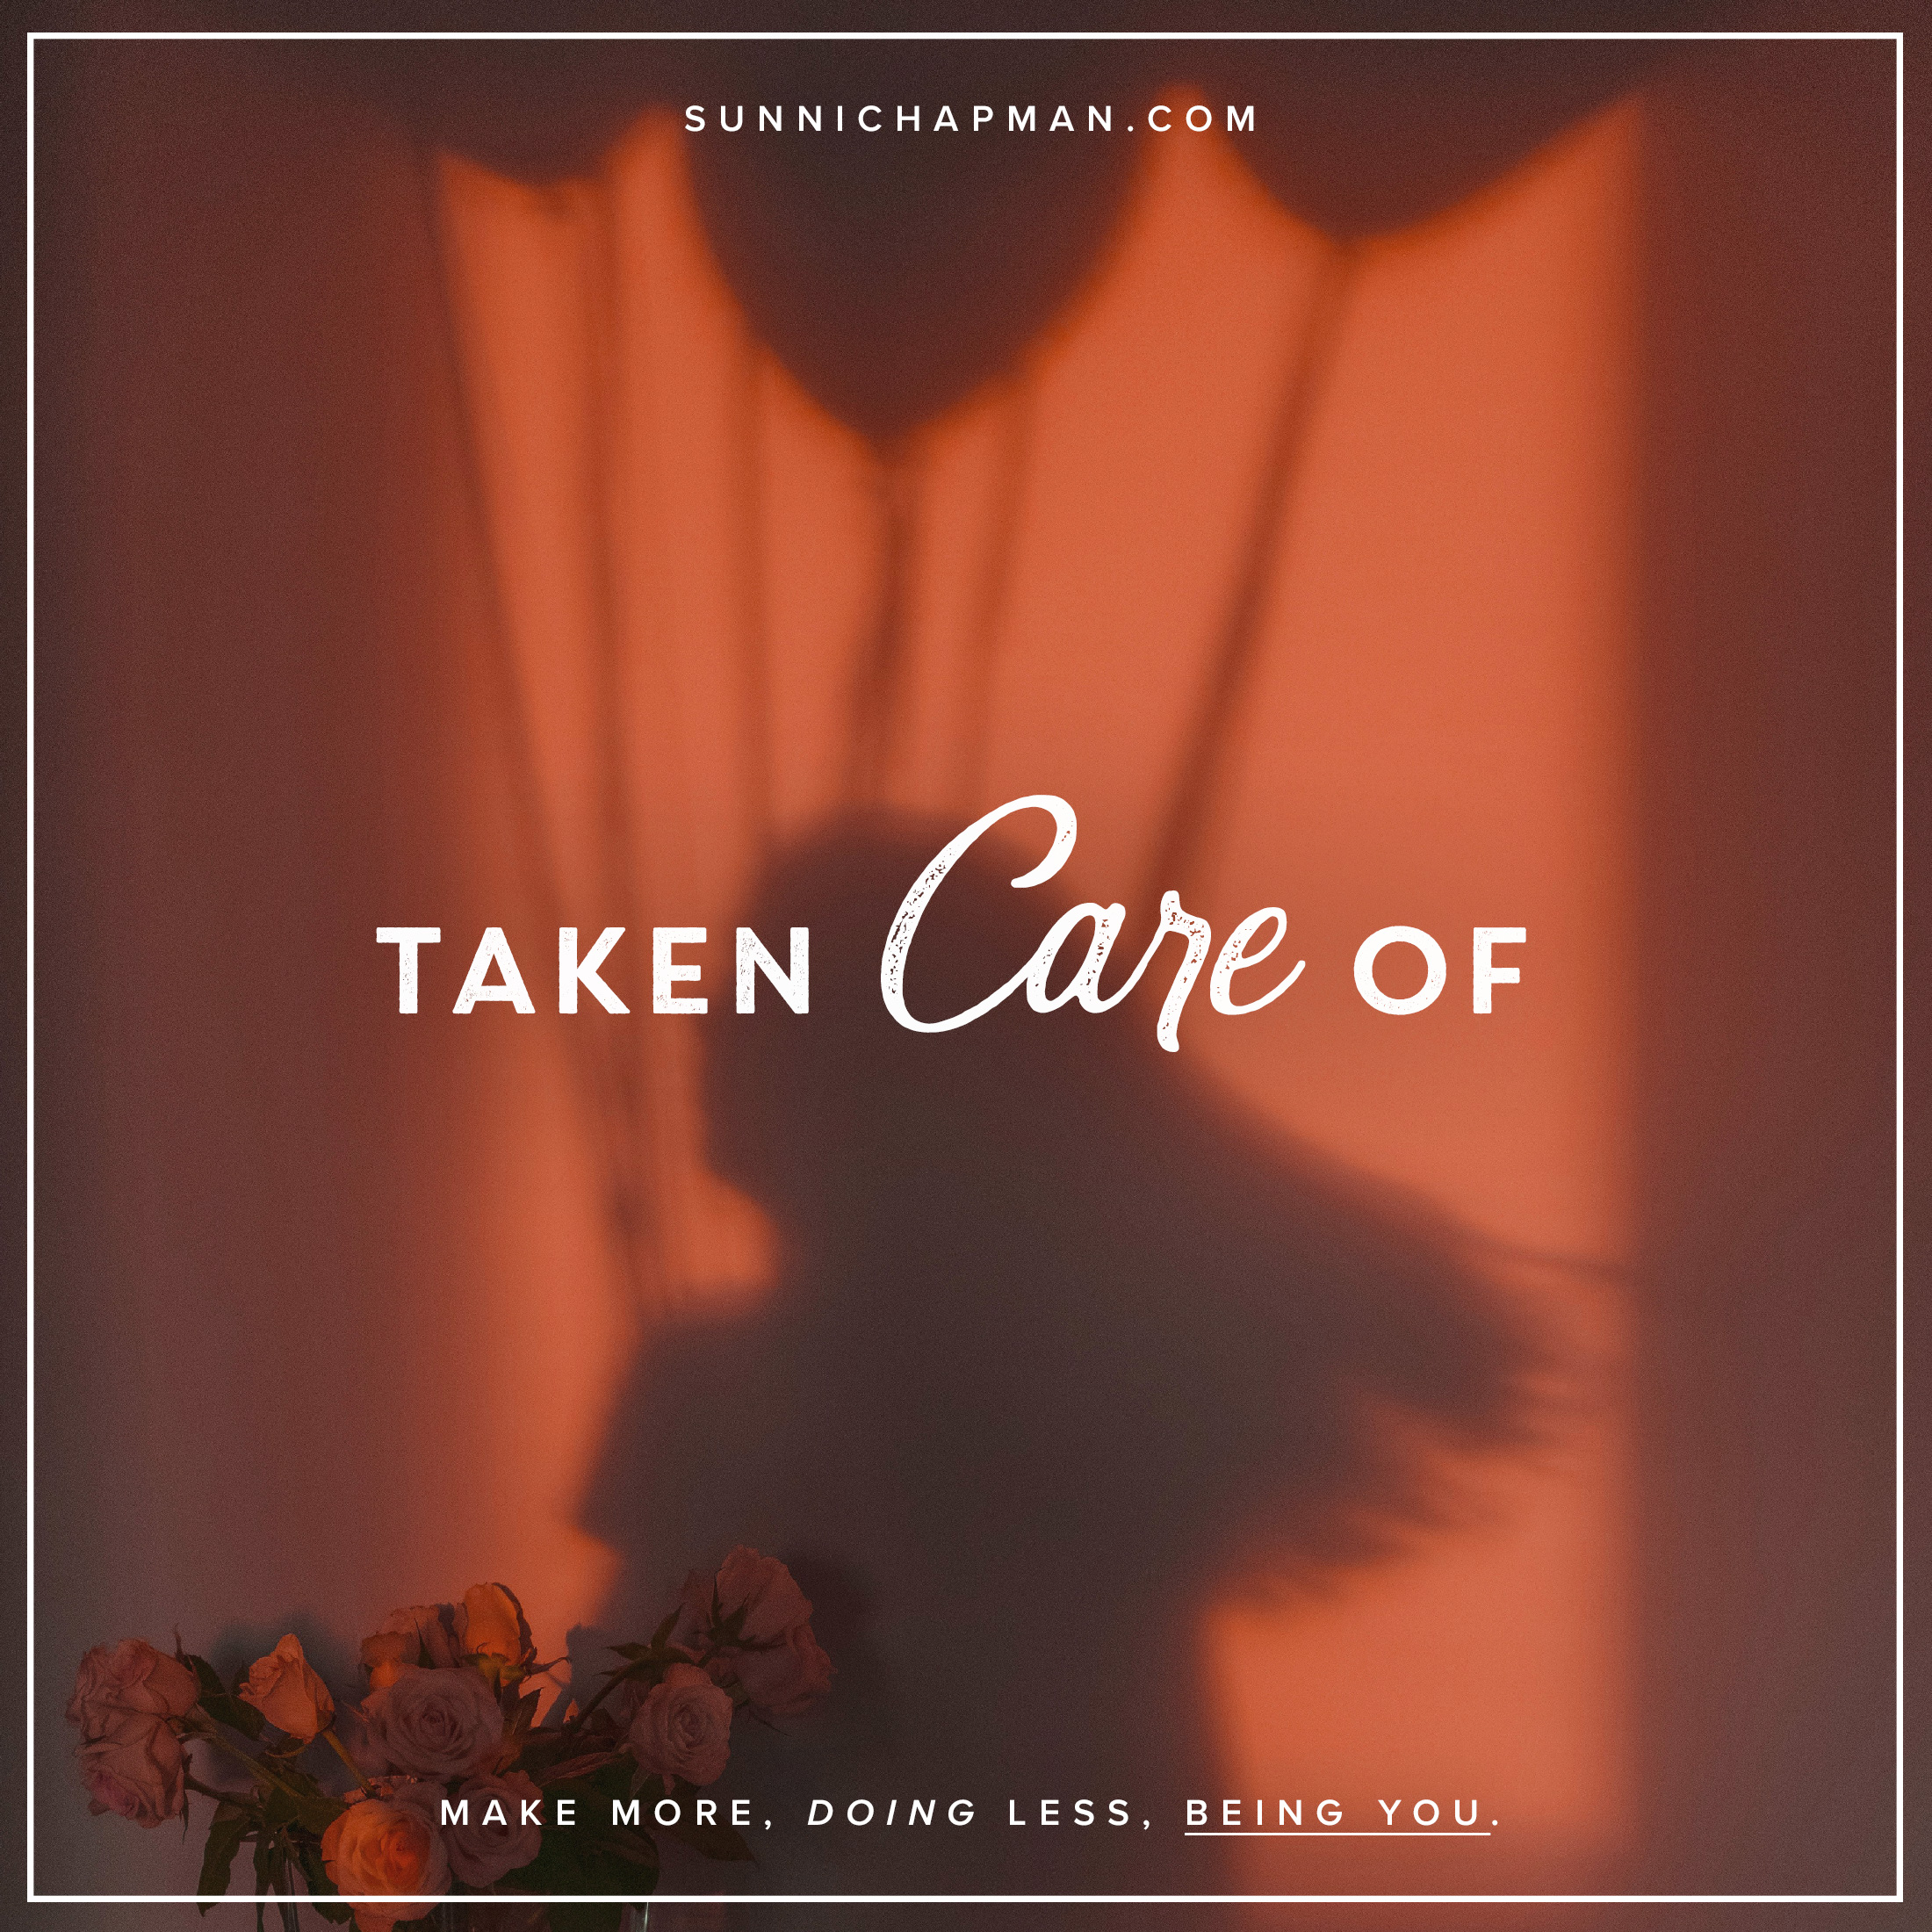 An image with an orange-tinted background showing the shadow of a person holding balloons. The text 'TAKEN Care OF' is prominently displayed in the center. At the top of the image is the website 'sunnichapman.com'. At the bottom, there is a bouquet of flowers and the text 'MAKE MORE, DOING LESS, BEING YOU.' in white font.